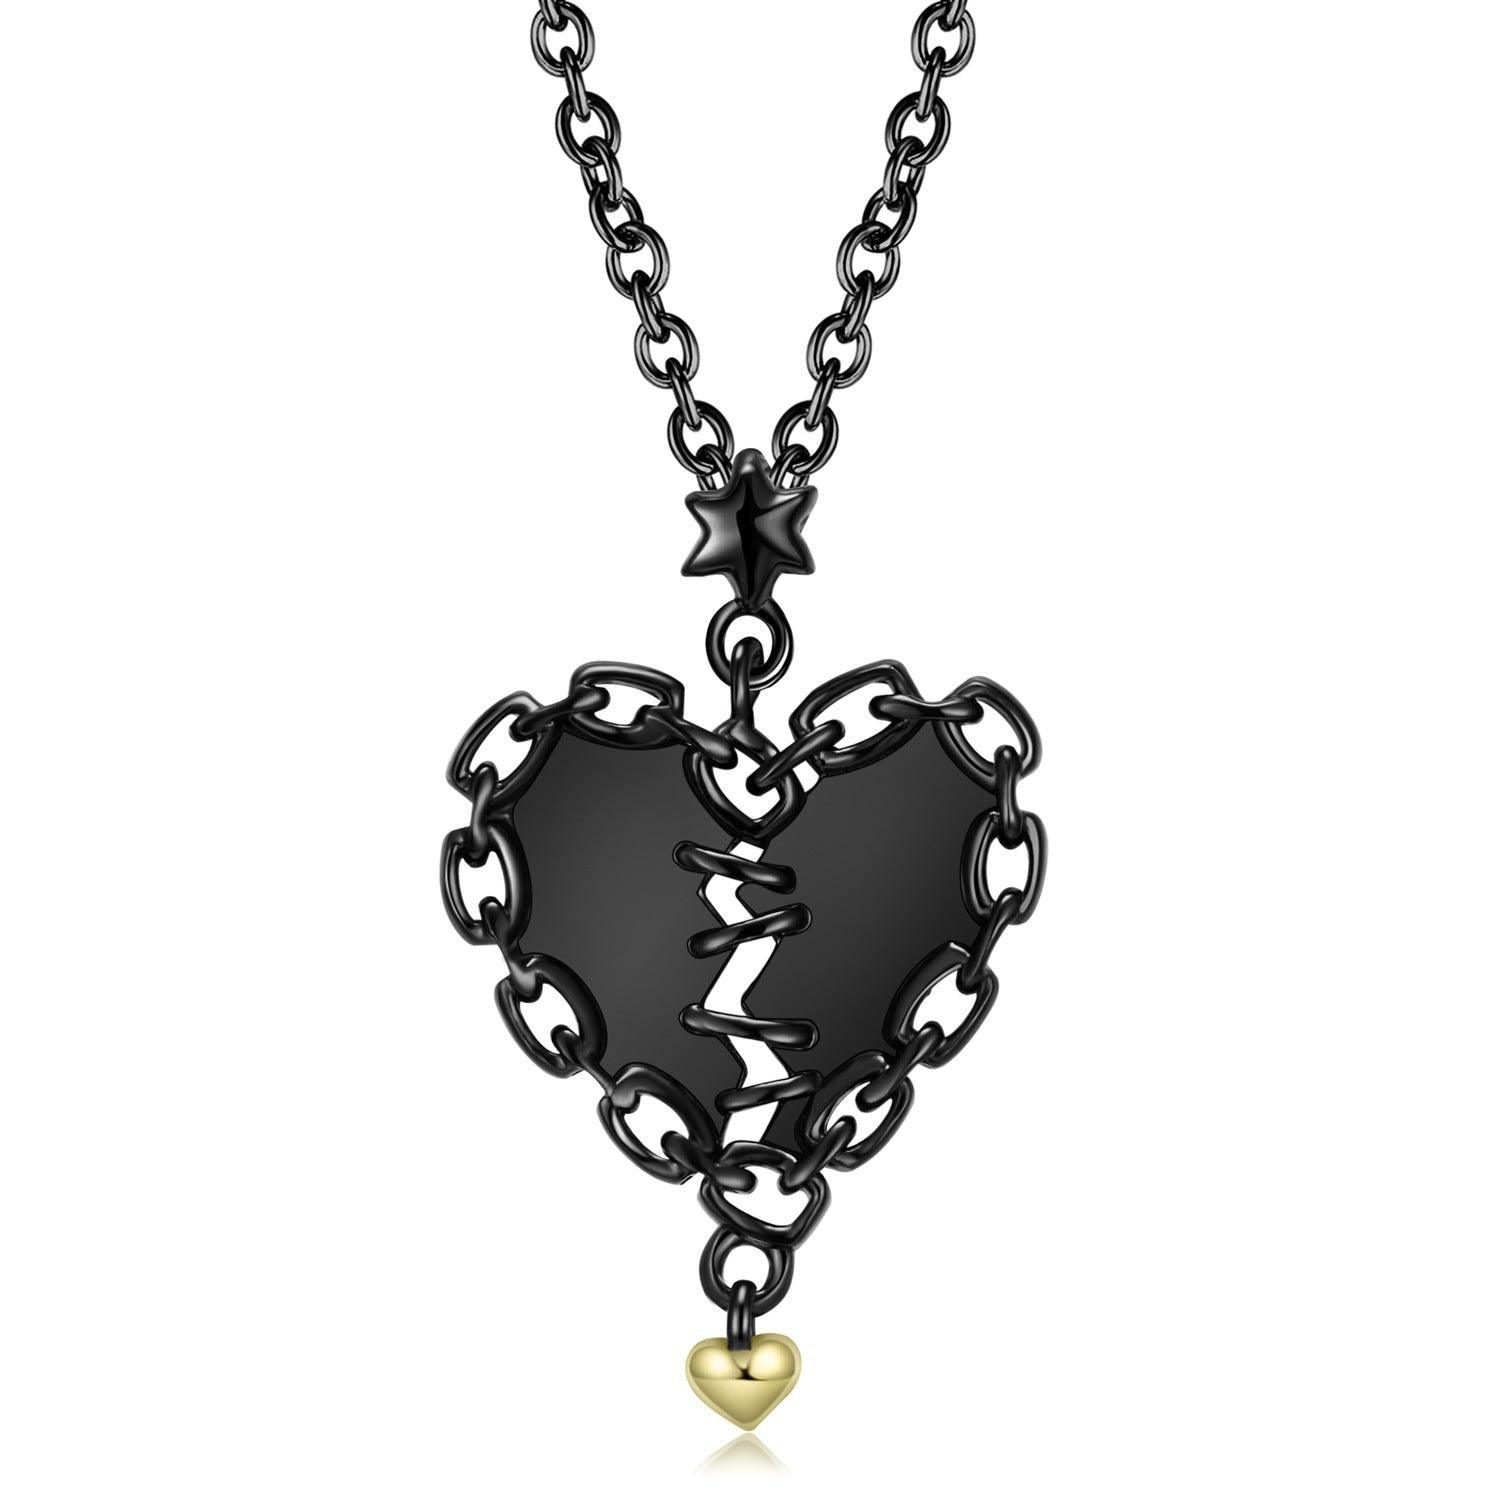 Sewn Heart Cute Black GoldS925 Silver Necklace in 2023 | Sewn Heart Cute Black GoldS925 Silver Necklace - undefined | Black GoldS925 Silver Necklace, creative necklace, S925 Sterling Silver Necklace, Sewn Heart Necklace | From Hunny Life | hunnylife.com